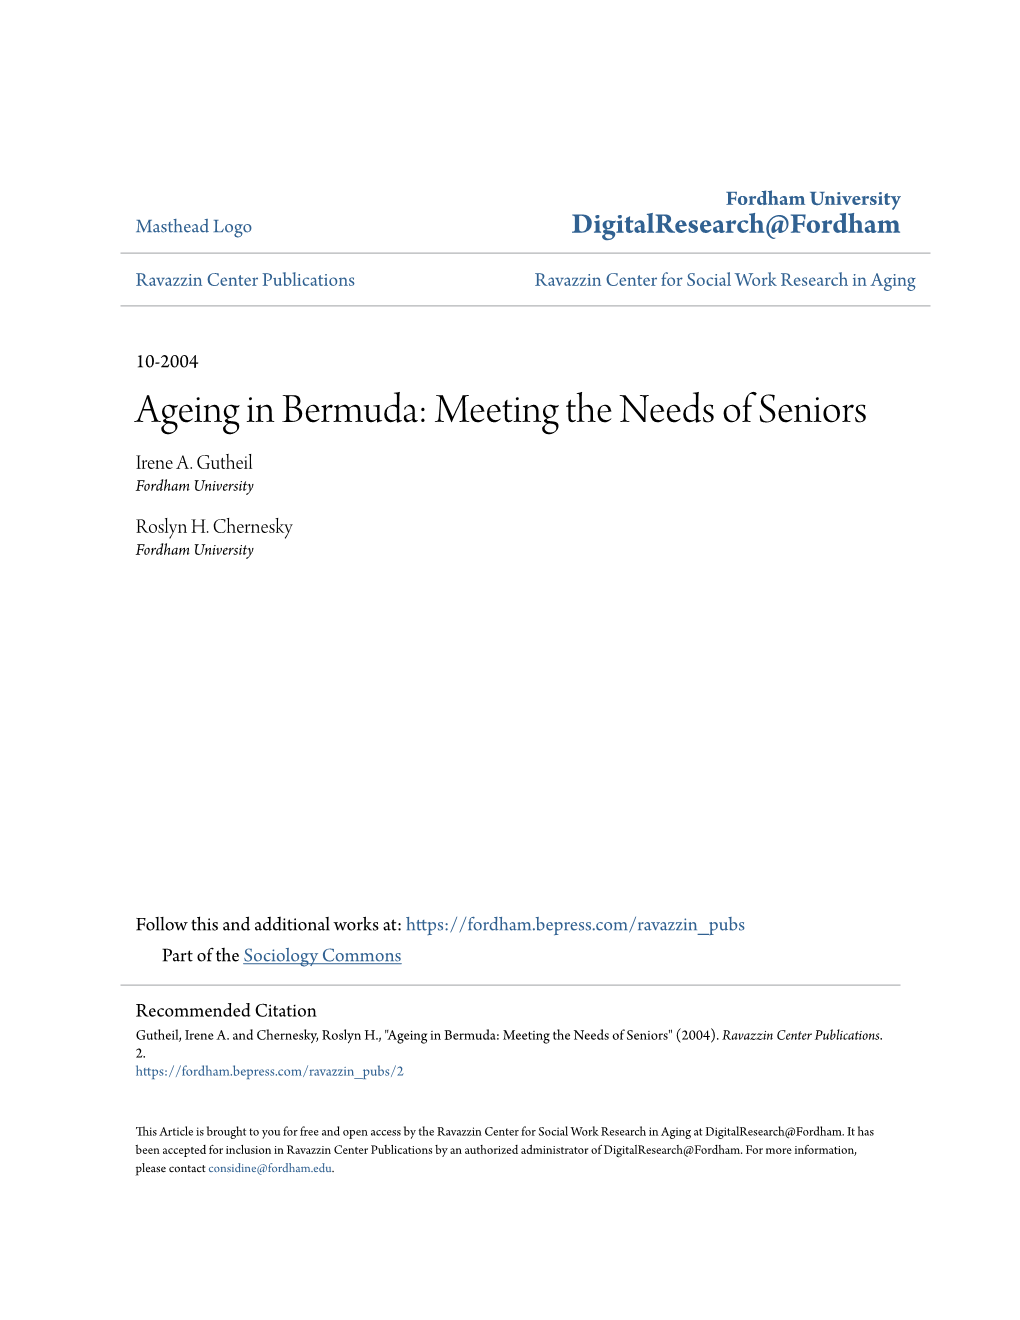 Ageing in Bermuda: Meeting the Needs of Seniors Irene A